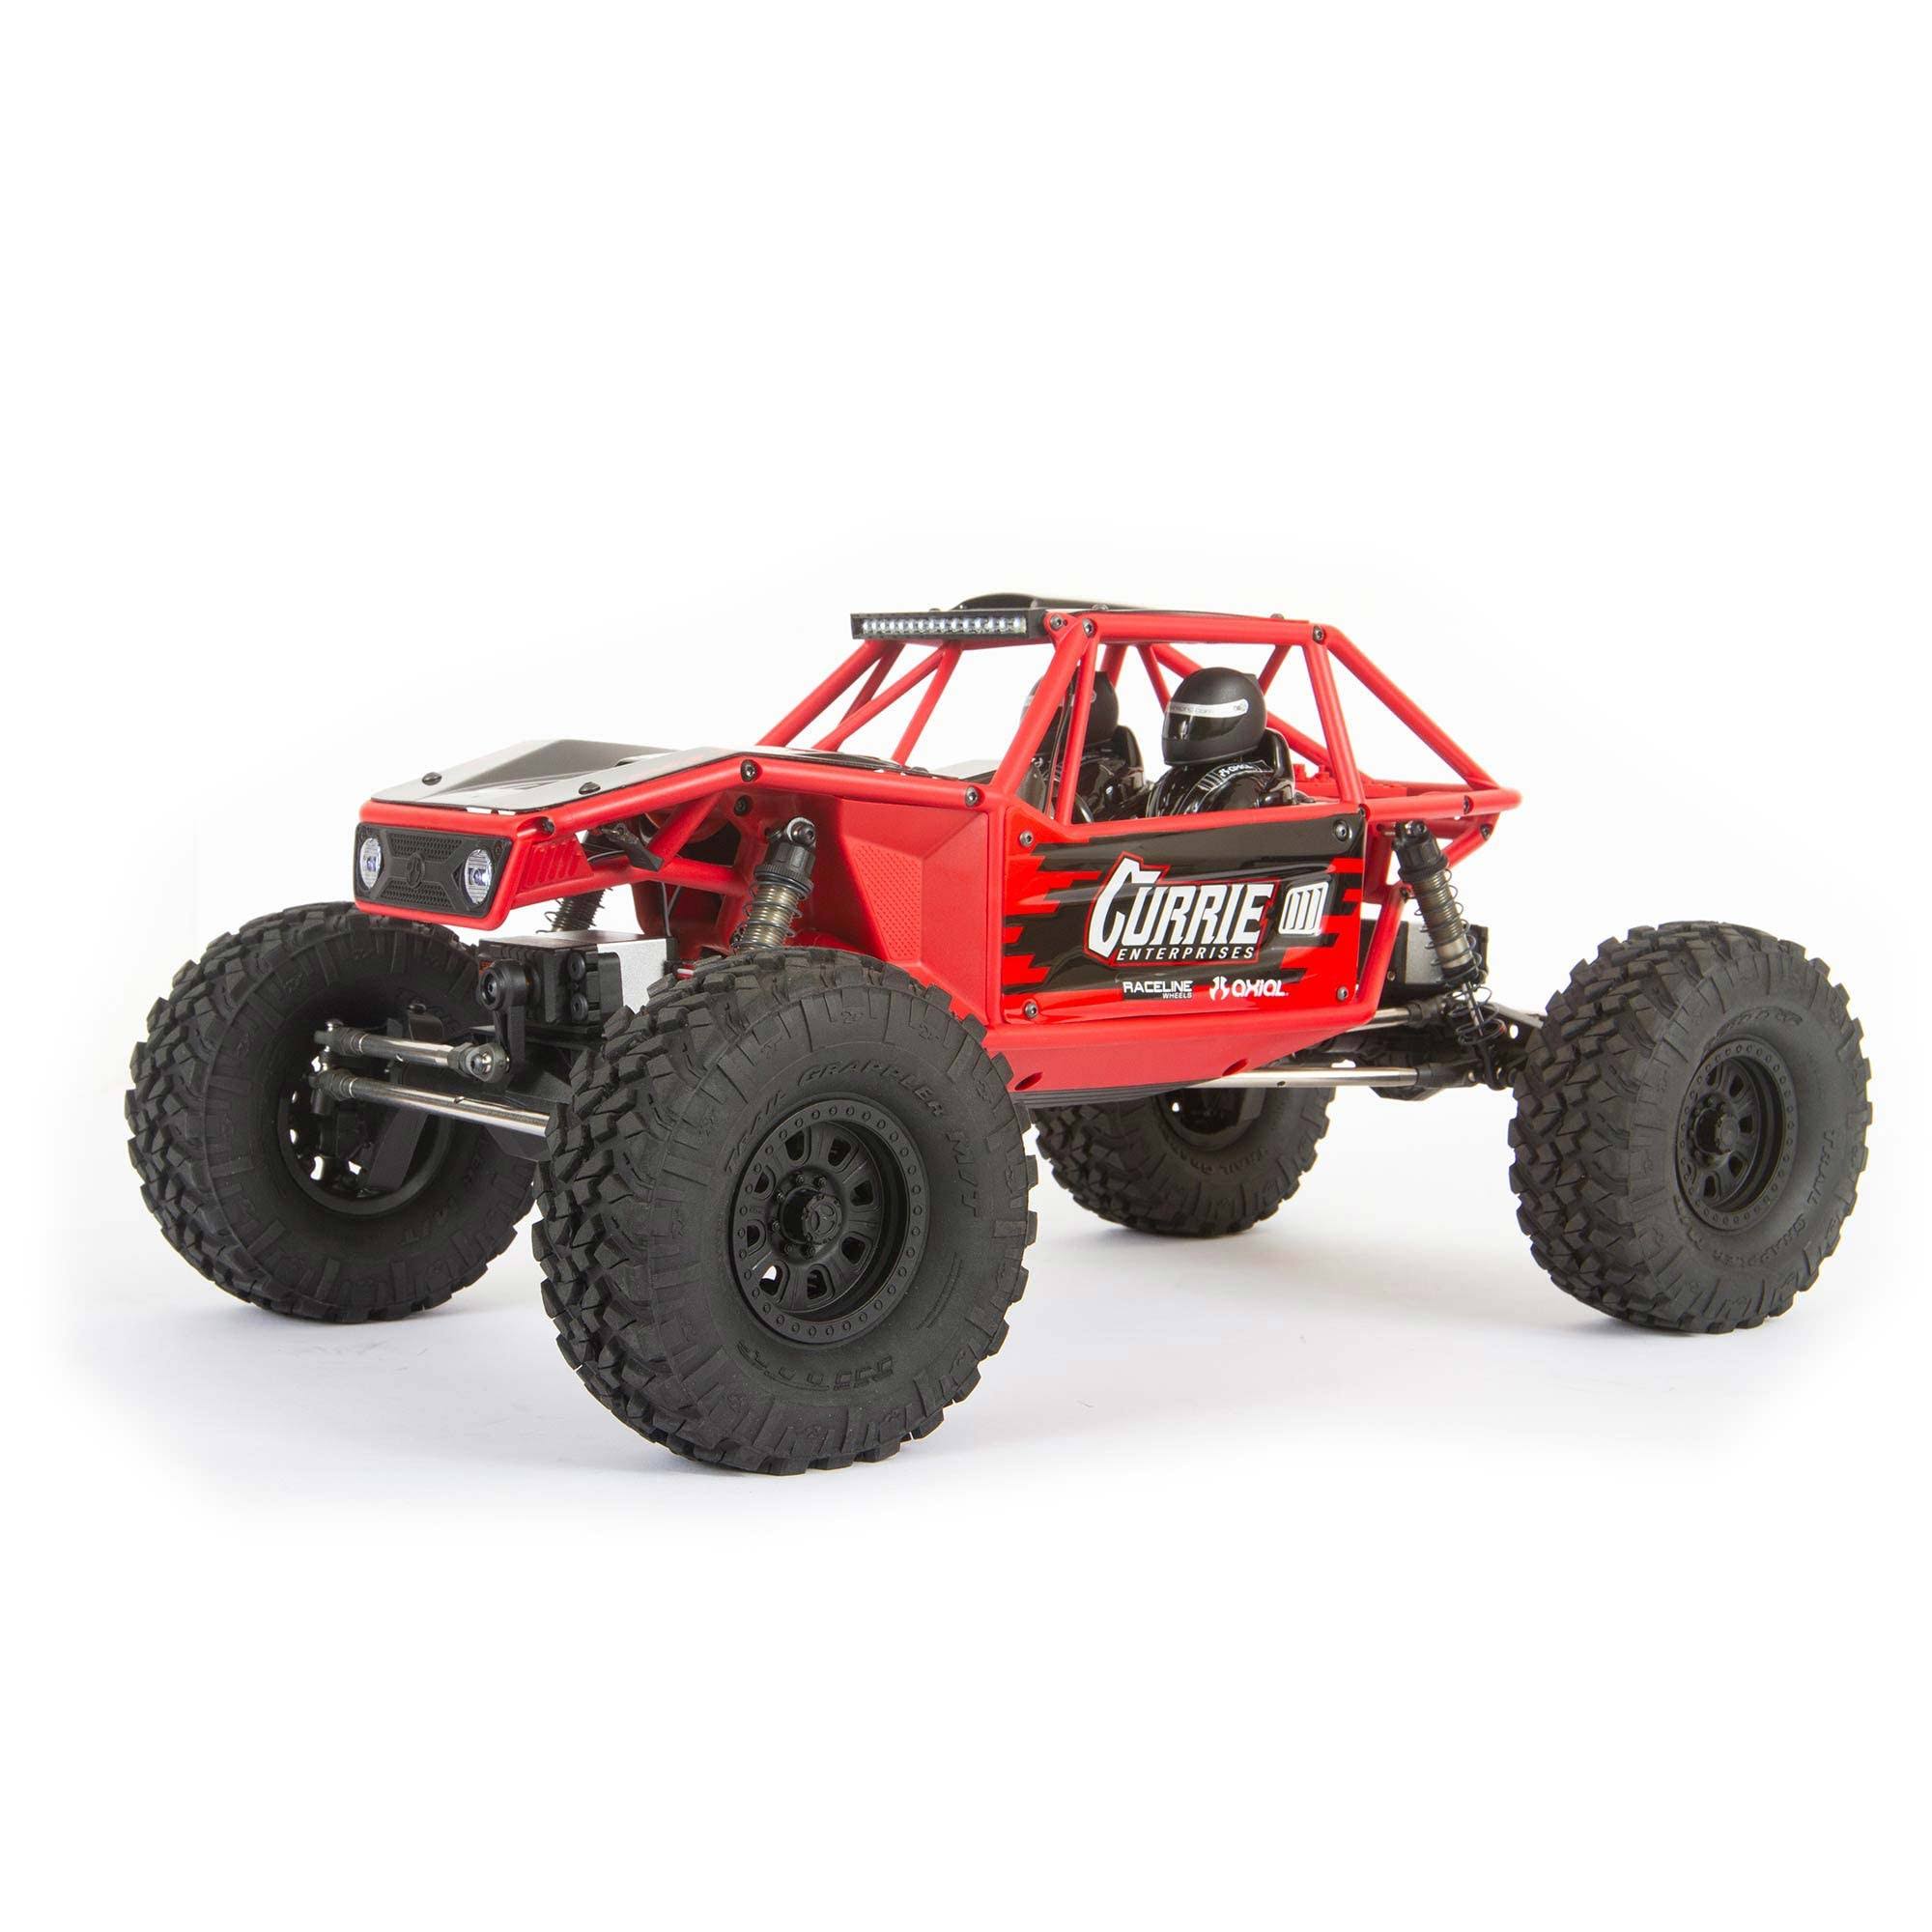 Axial RC Truck 1/10 Capra 1.9 4WS Unlimited Trail Buggy RTR (Batteries and Charger Not Included), Red, AXI03022T1